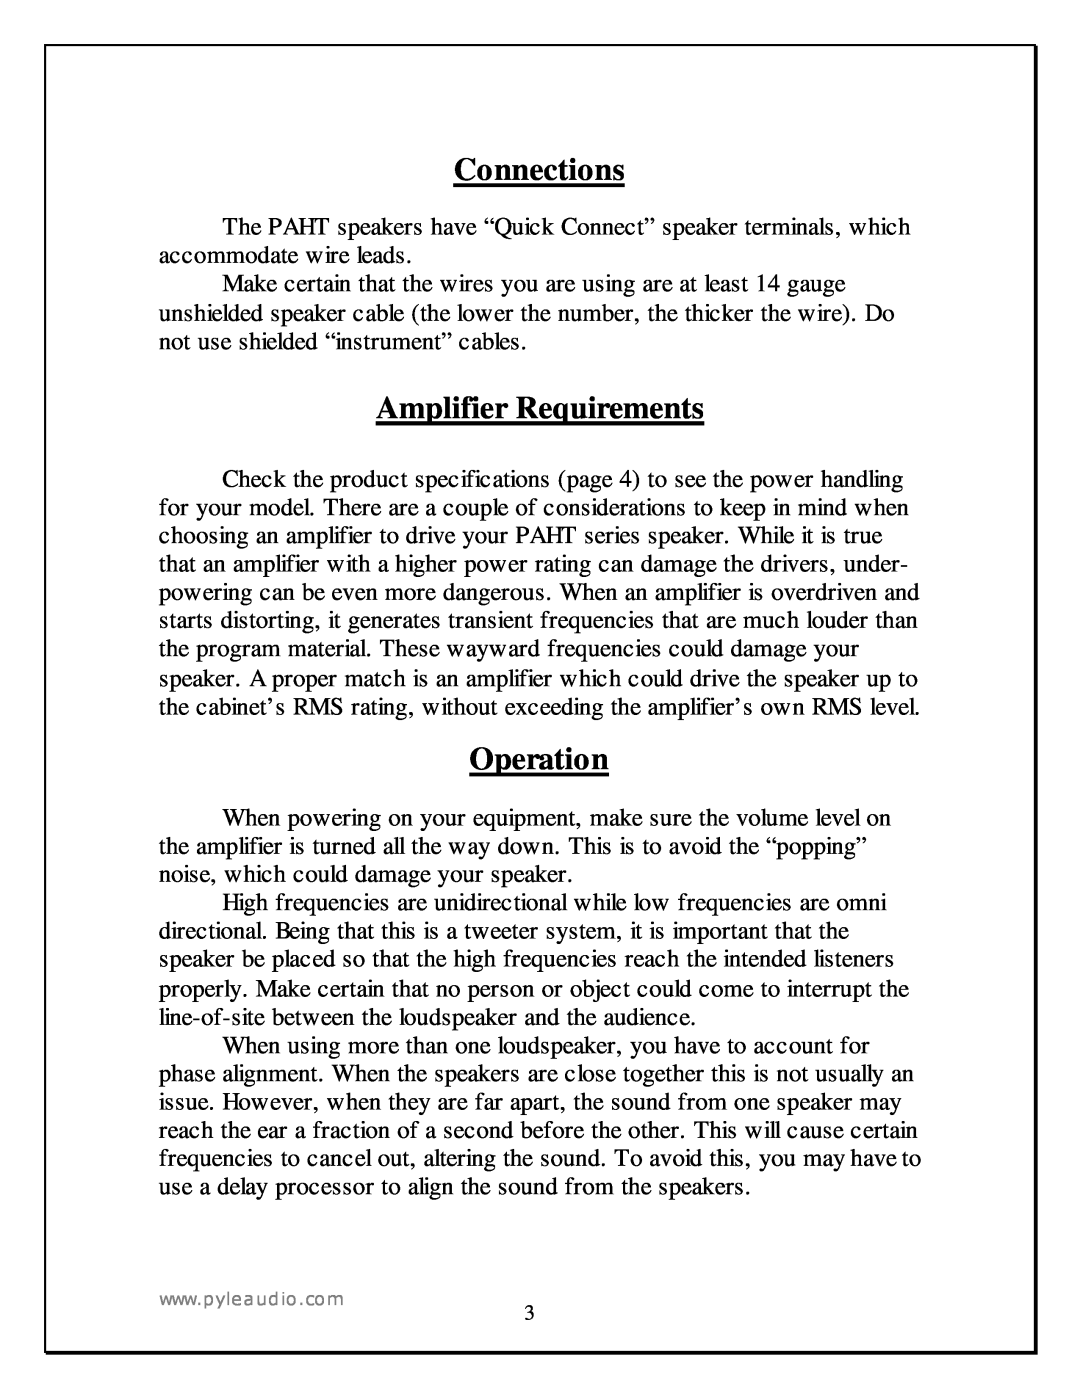 PYLE Audio PAHT4 manual Connections, Amplifier Requirements, Operation 